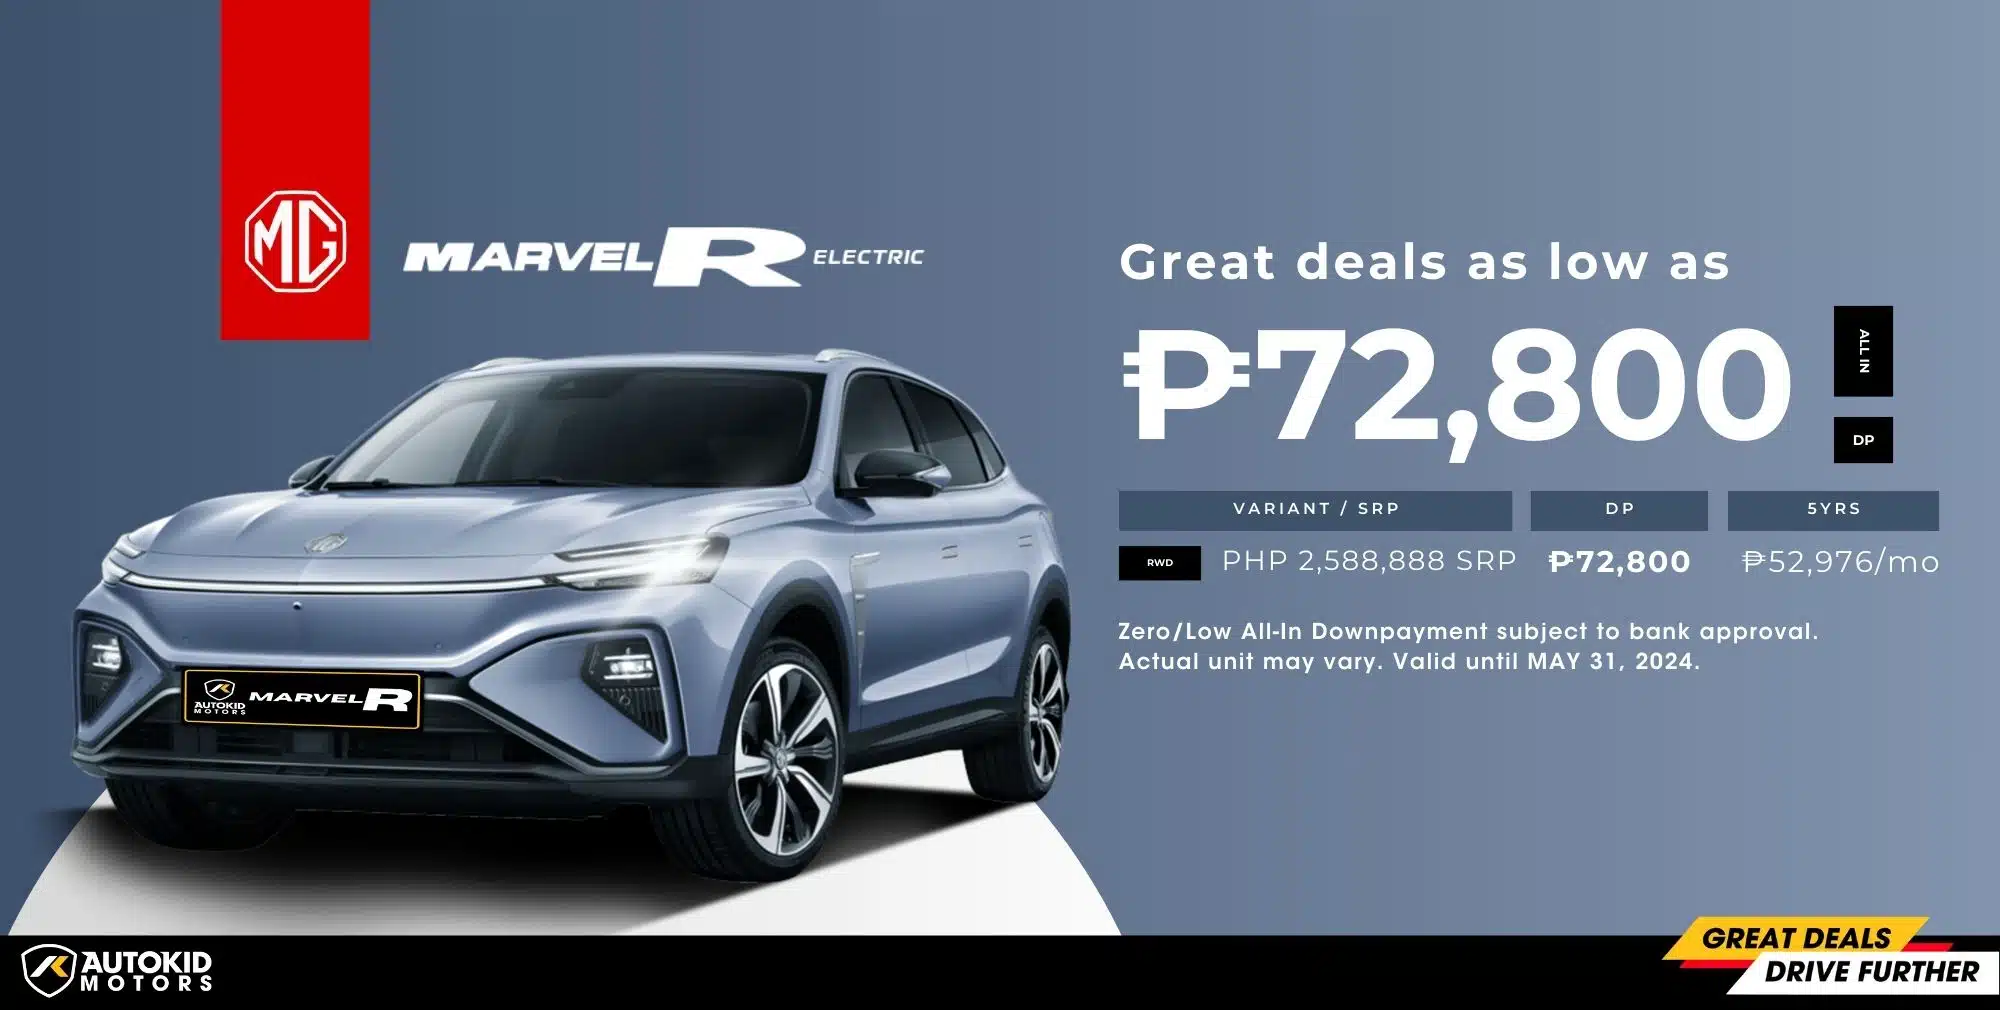 MG Marvel R lowest down payment on car Philippines